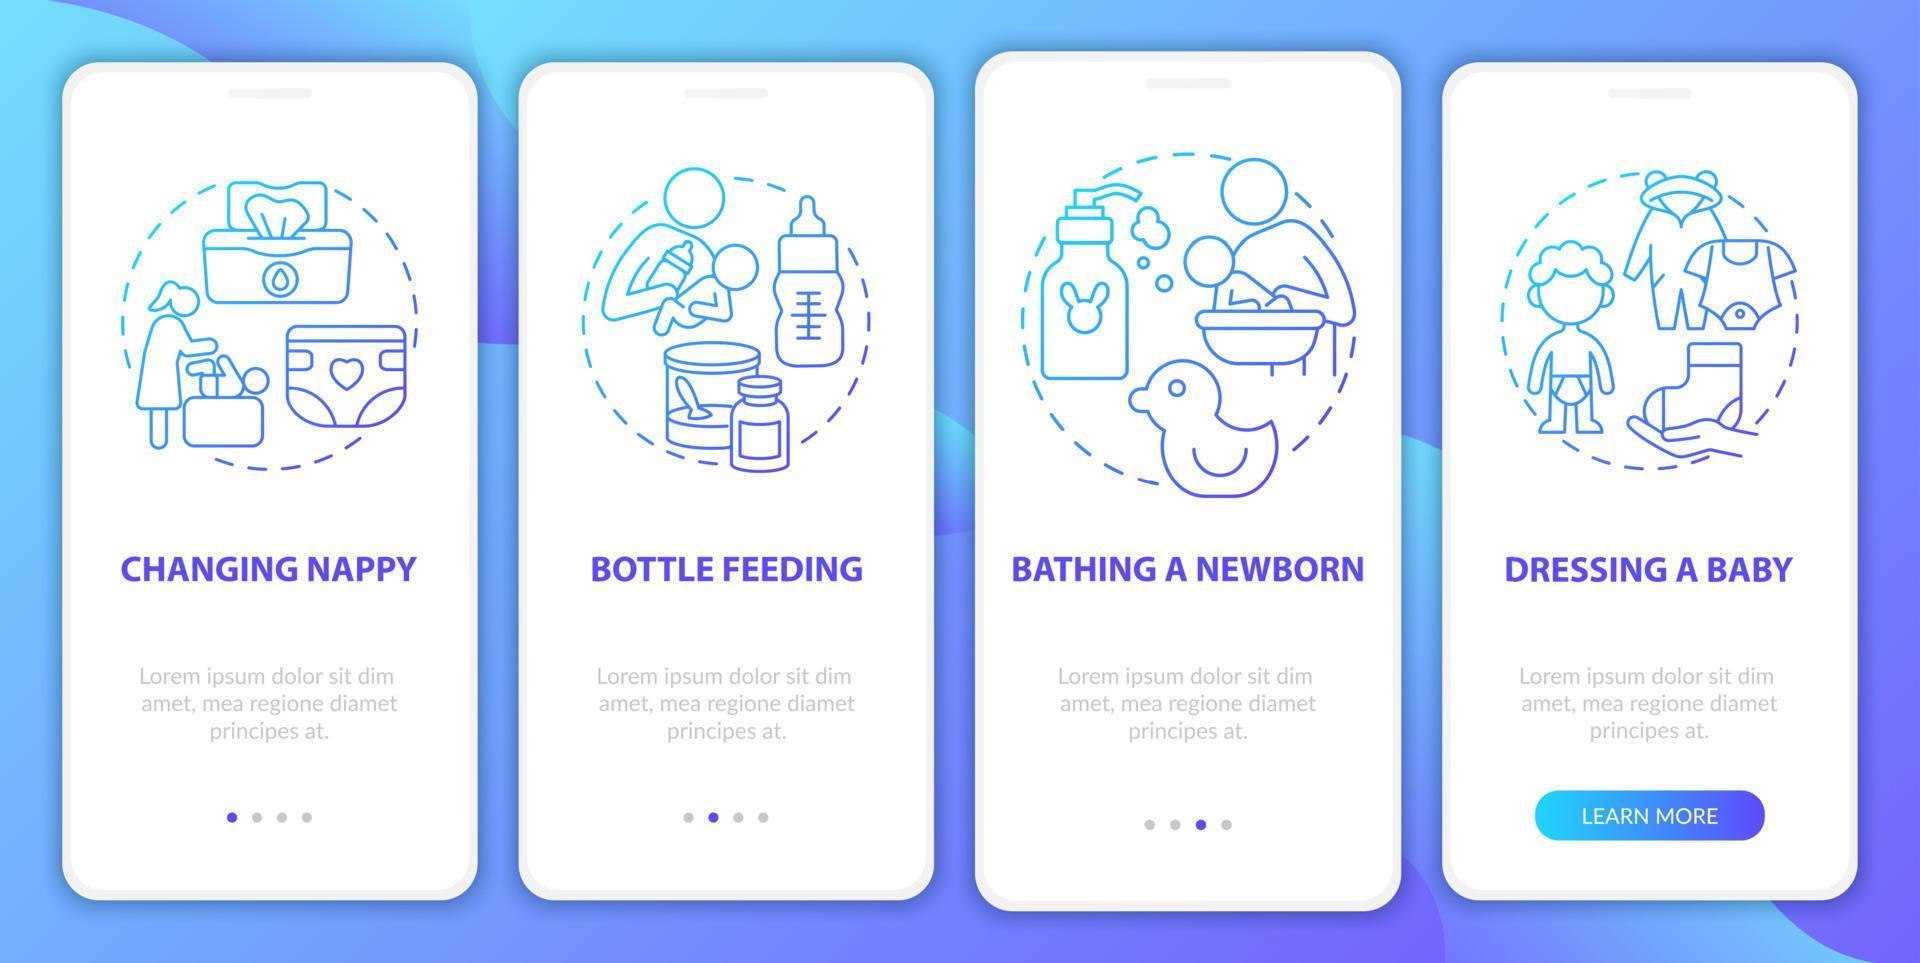 Infant care blue gradient onboarding mobile app page screen. Newborn care walkthrough 4 steps graphic instructions with concepts. UI, UX, GUI vector template with linear color illustrations